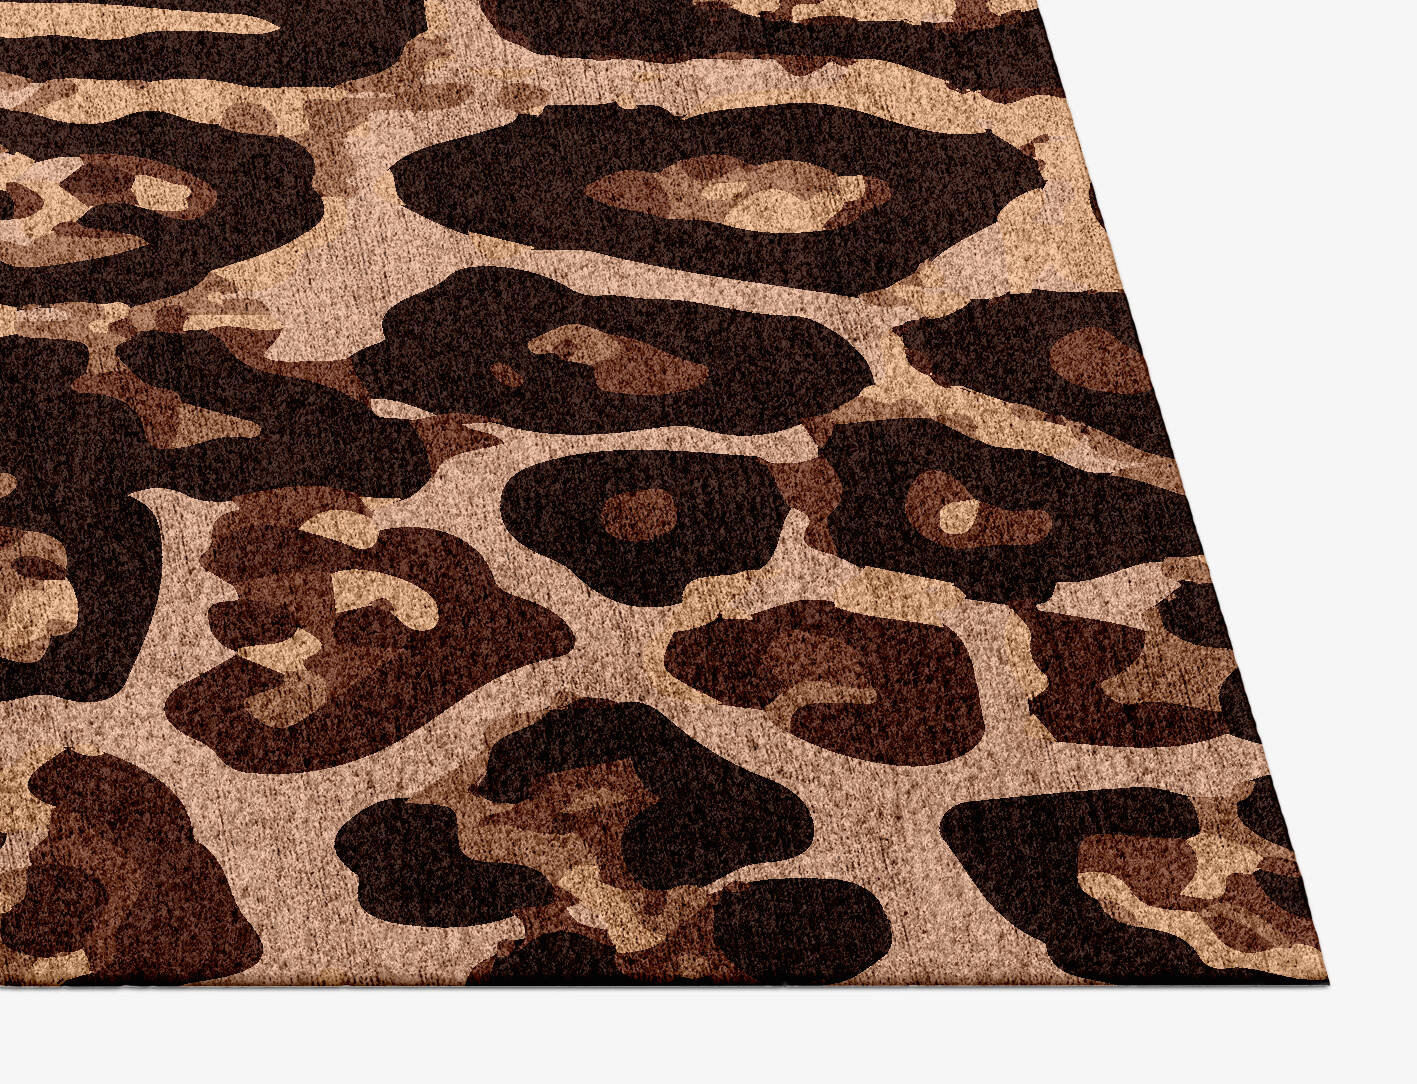 Fawn Spots Animal Prints Rectangle Hand Knotted Bamboo Silk Custom Rug by Rug Artisan